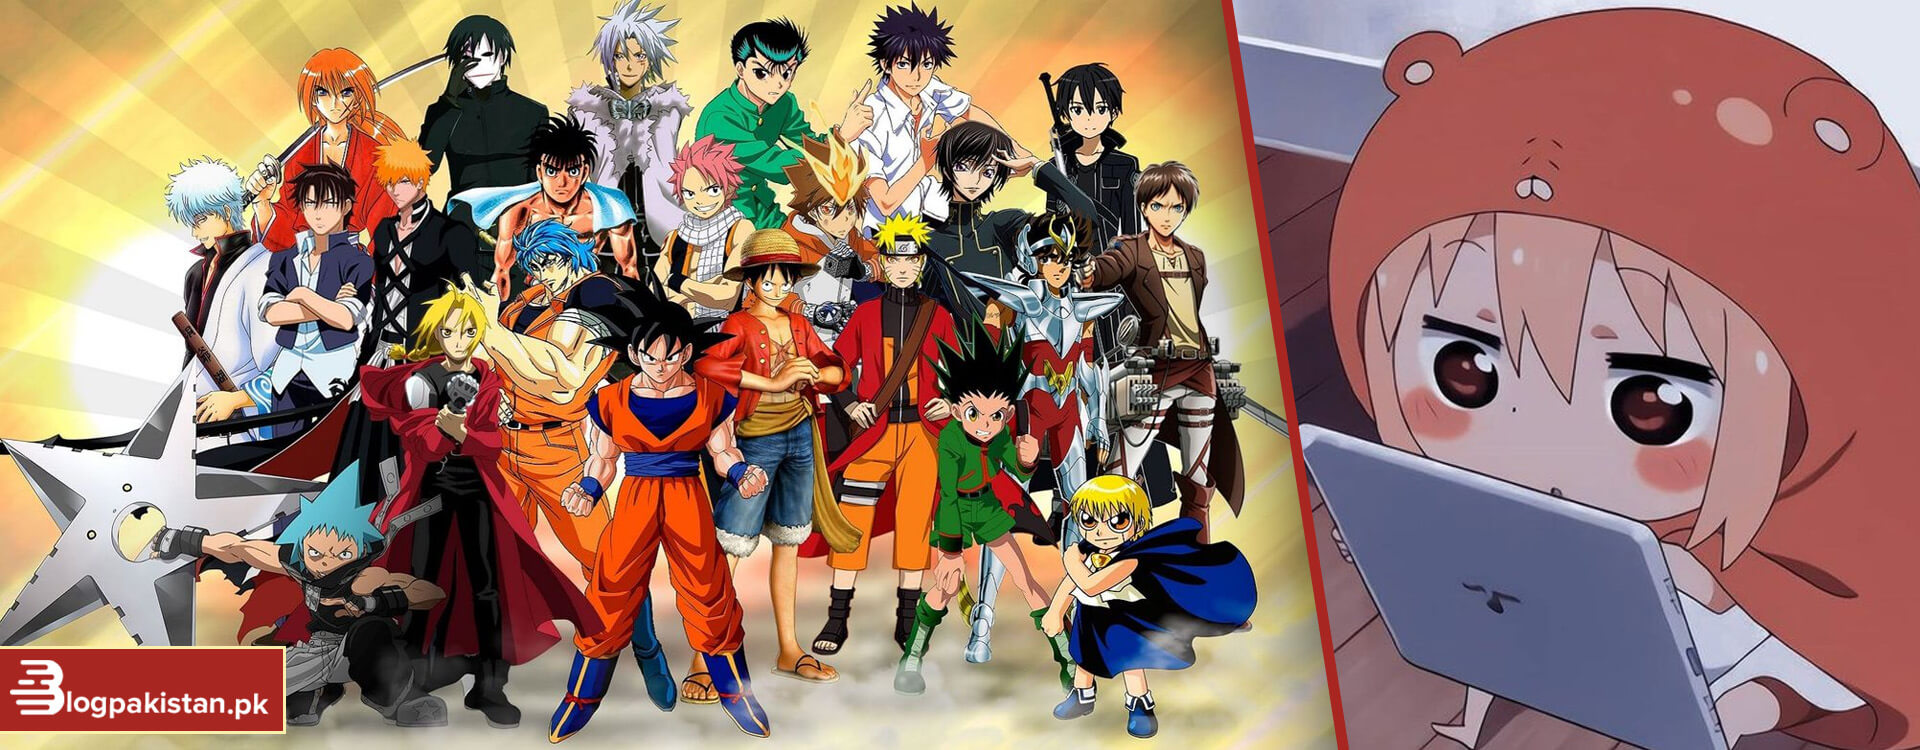 Top 7 Picks for Streaming Anime in Pakistan